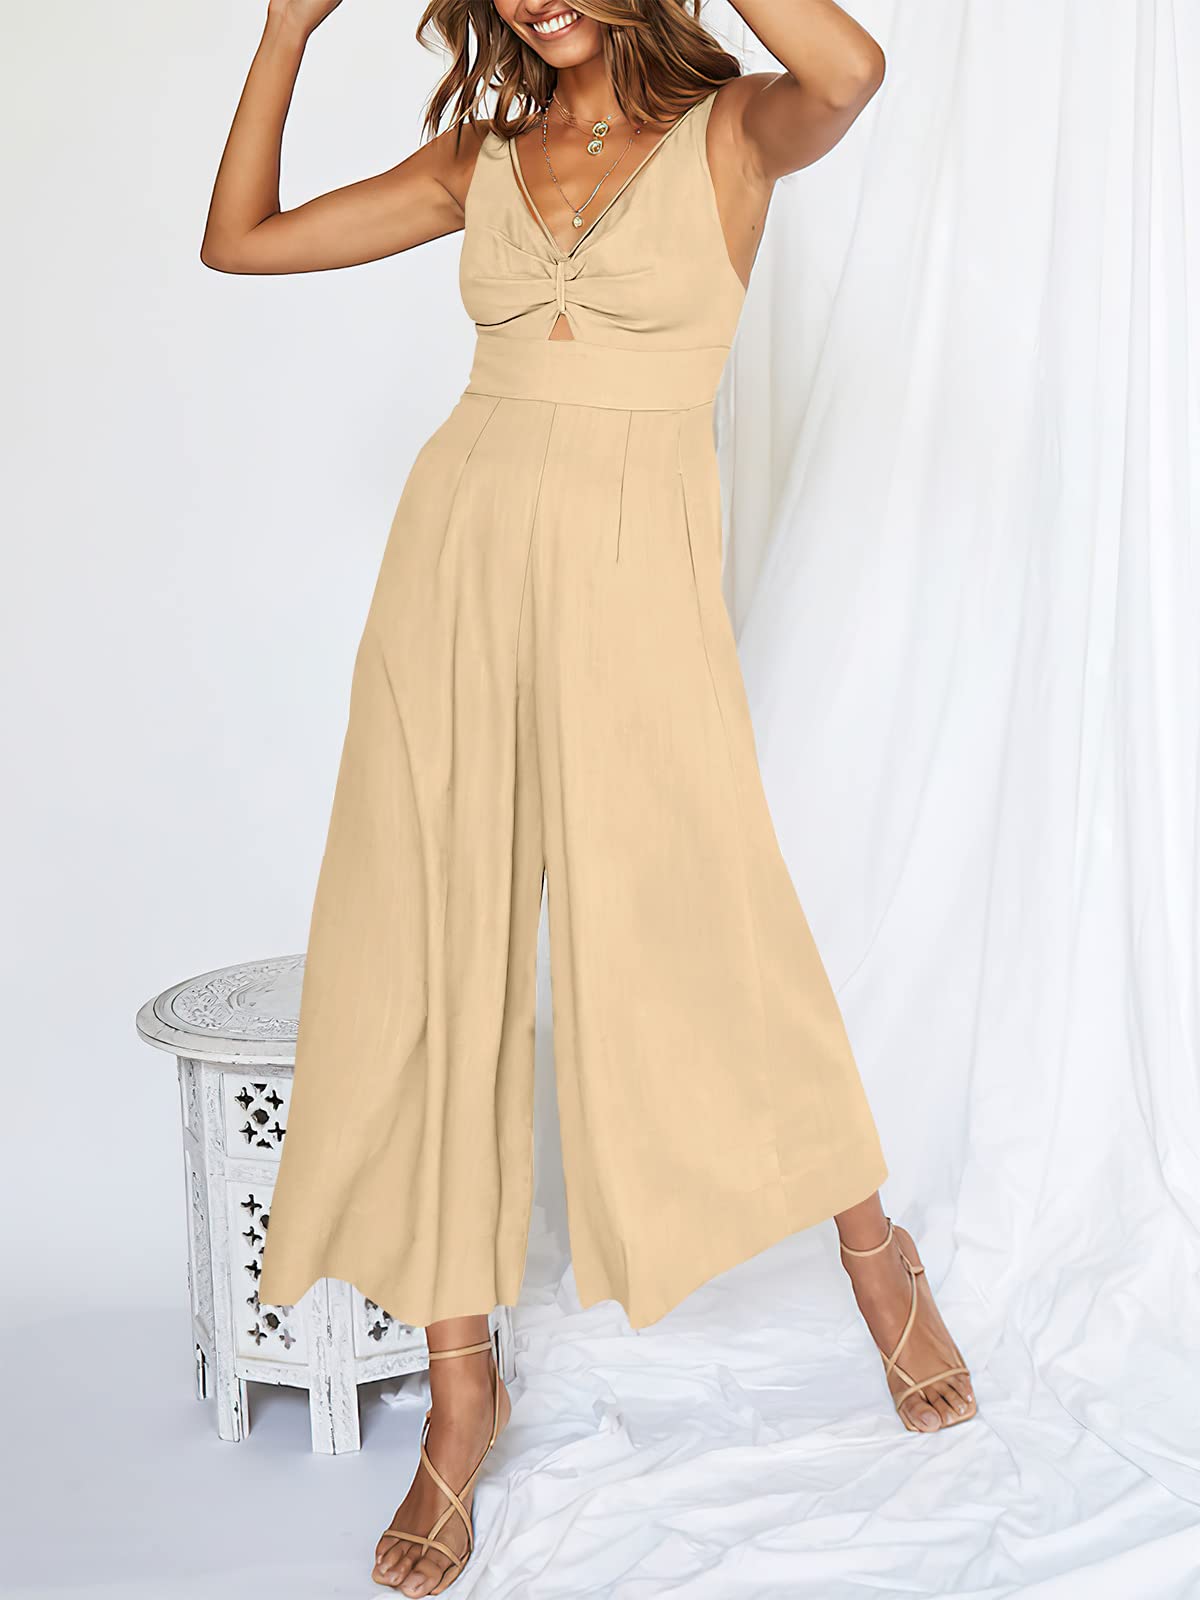 V Neck Cutout High-Waist Rompers (Buy 2 free shipping)